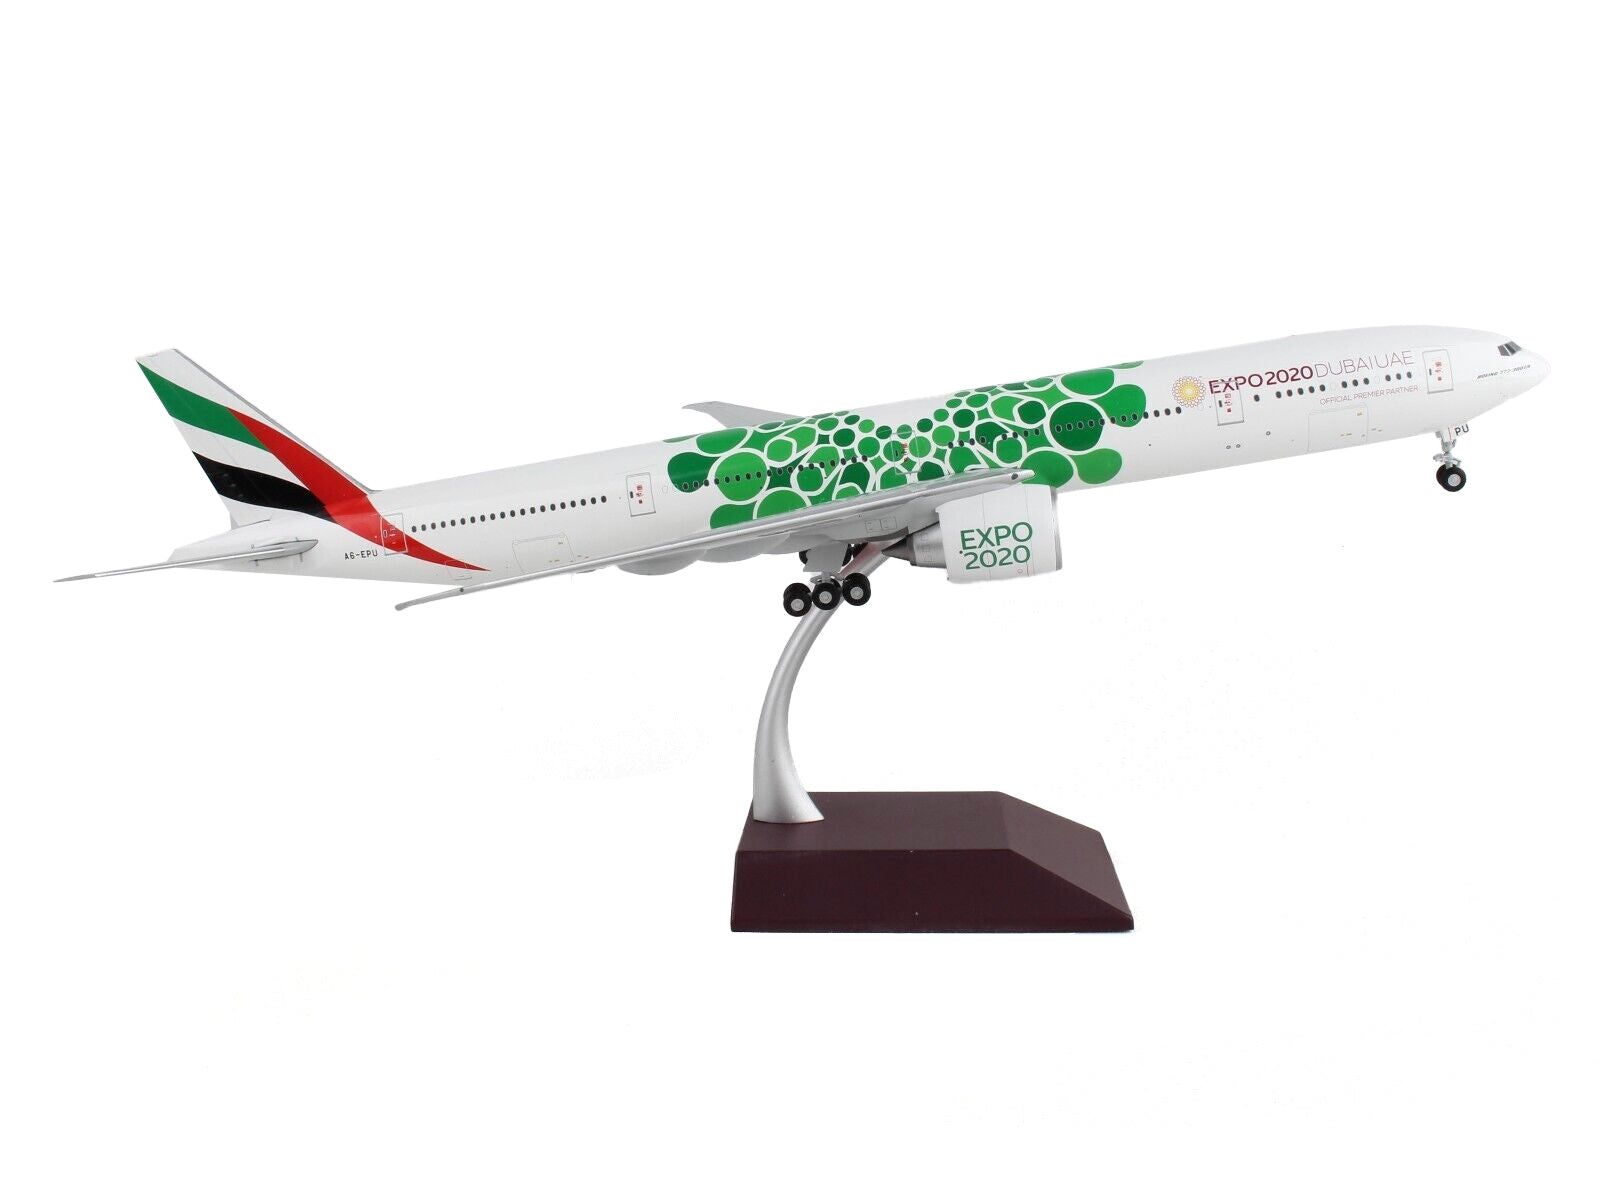 Boeing 777-300ER Commercial Aircraft "Emirates Airlines - Dubai Expo 2020" White with Green Graphics